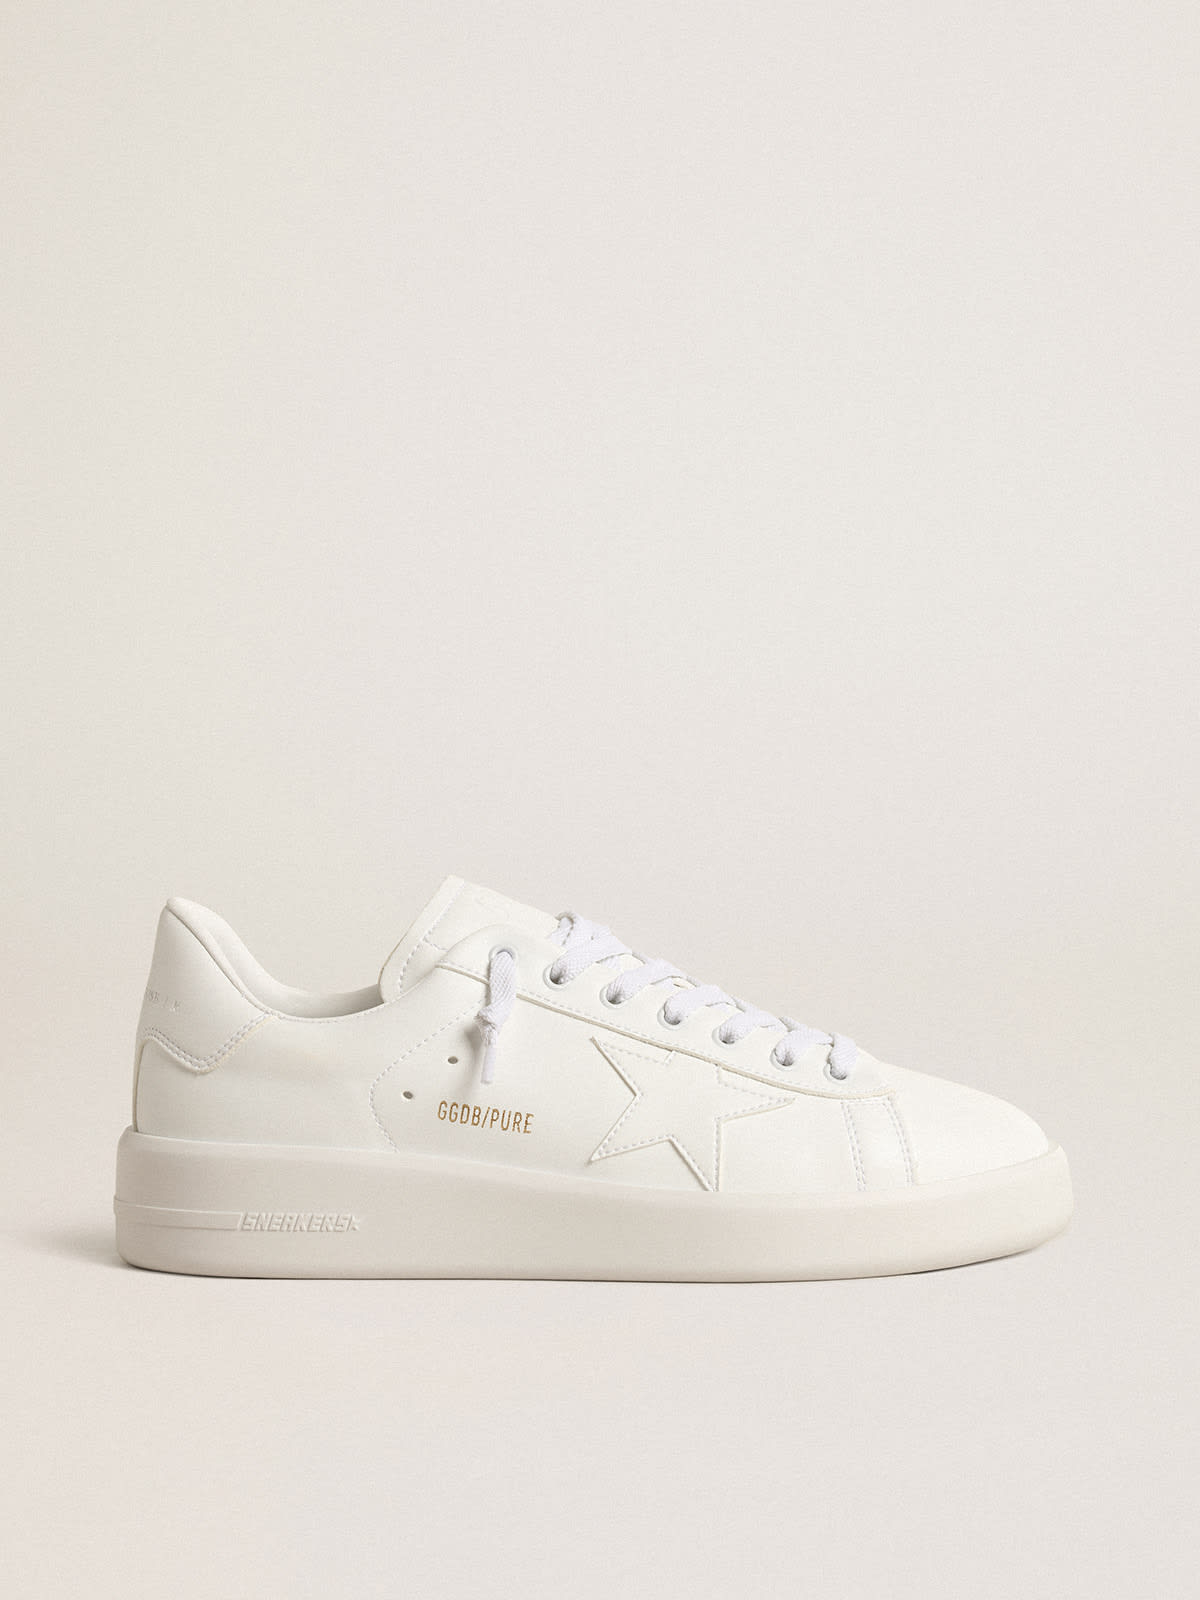 Golden Goose - Women’s bio-based Purestar with white star and heel tab in 